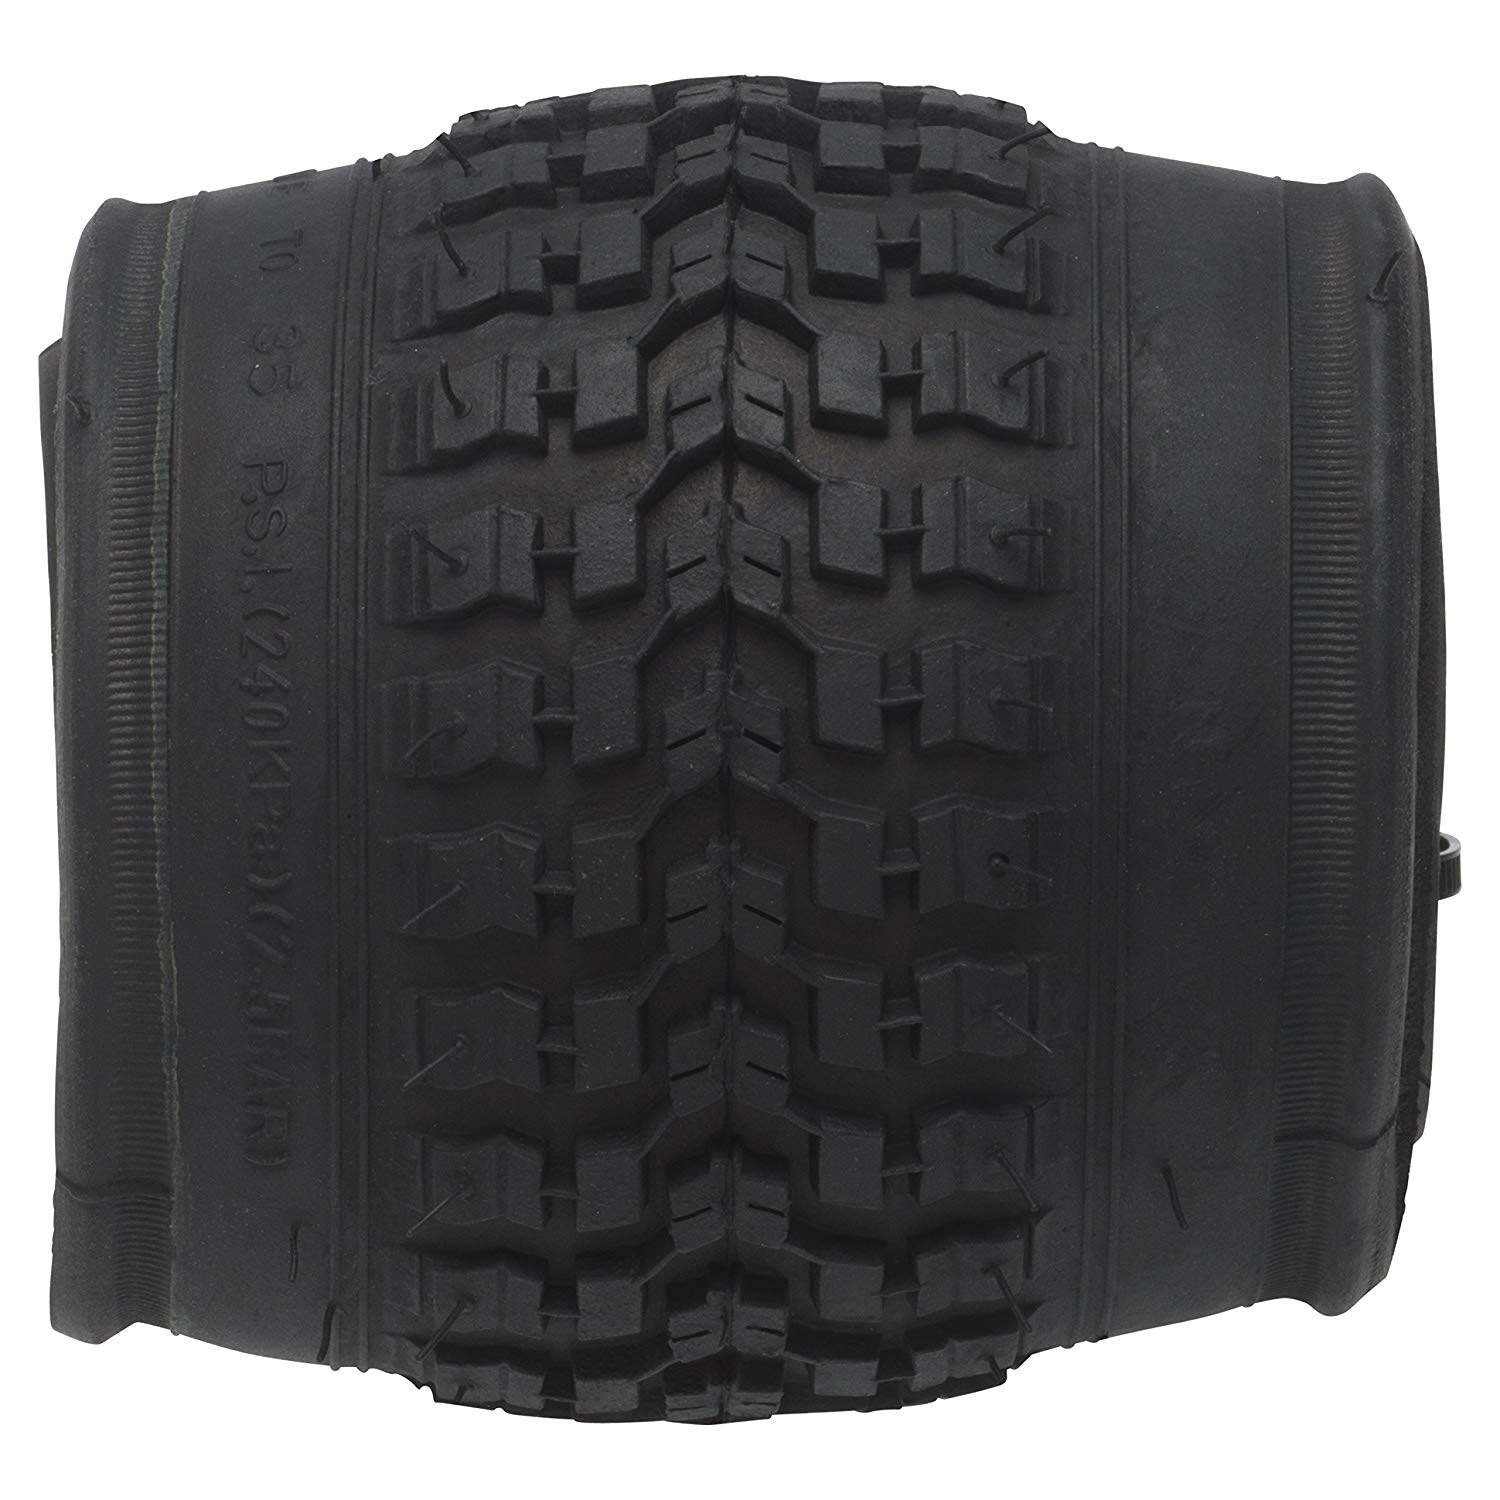 12.5 X 2.25 Black Sports & Outdoors Folding Bead Bicycle Tire